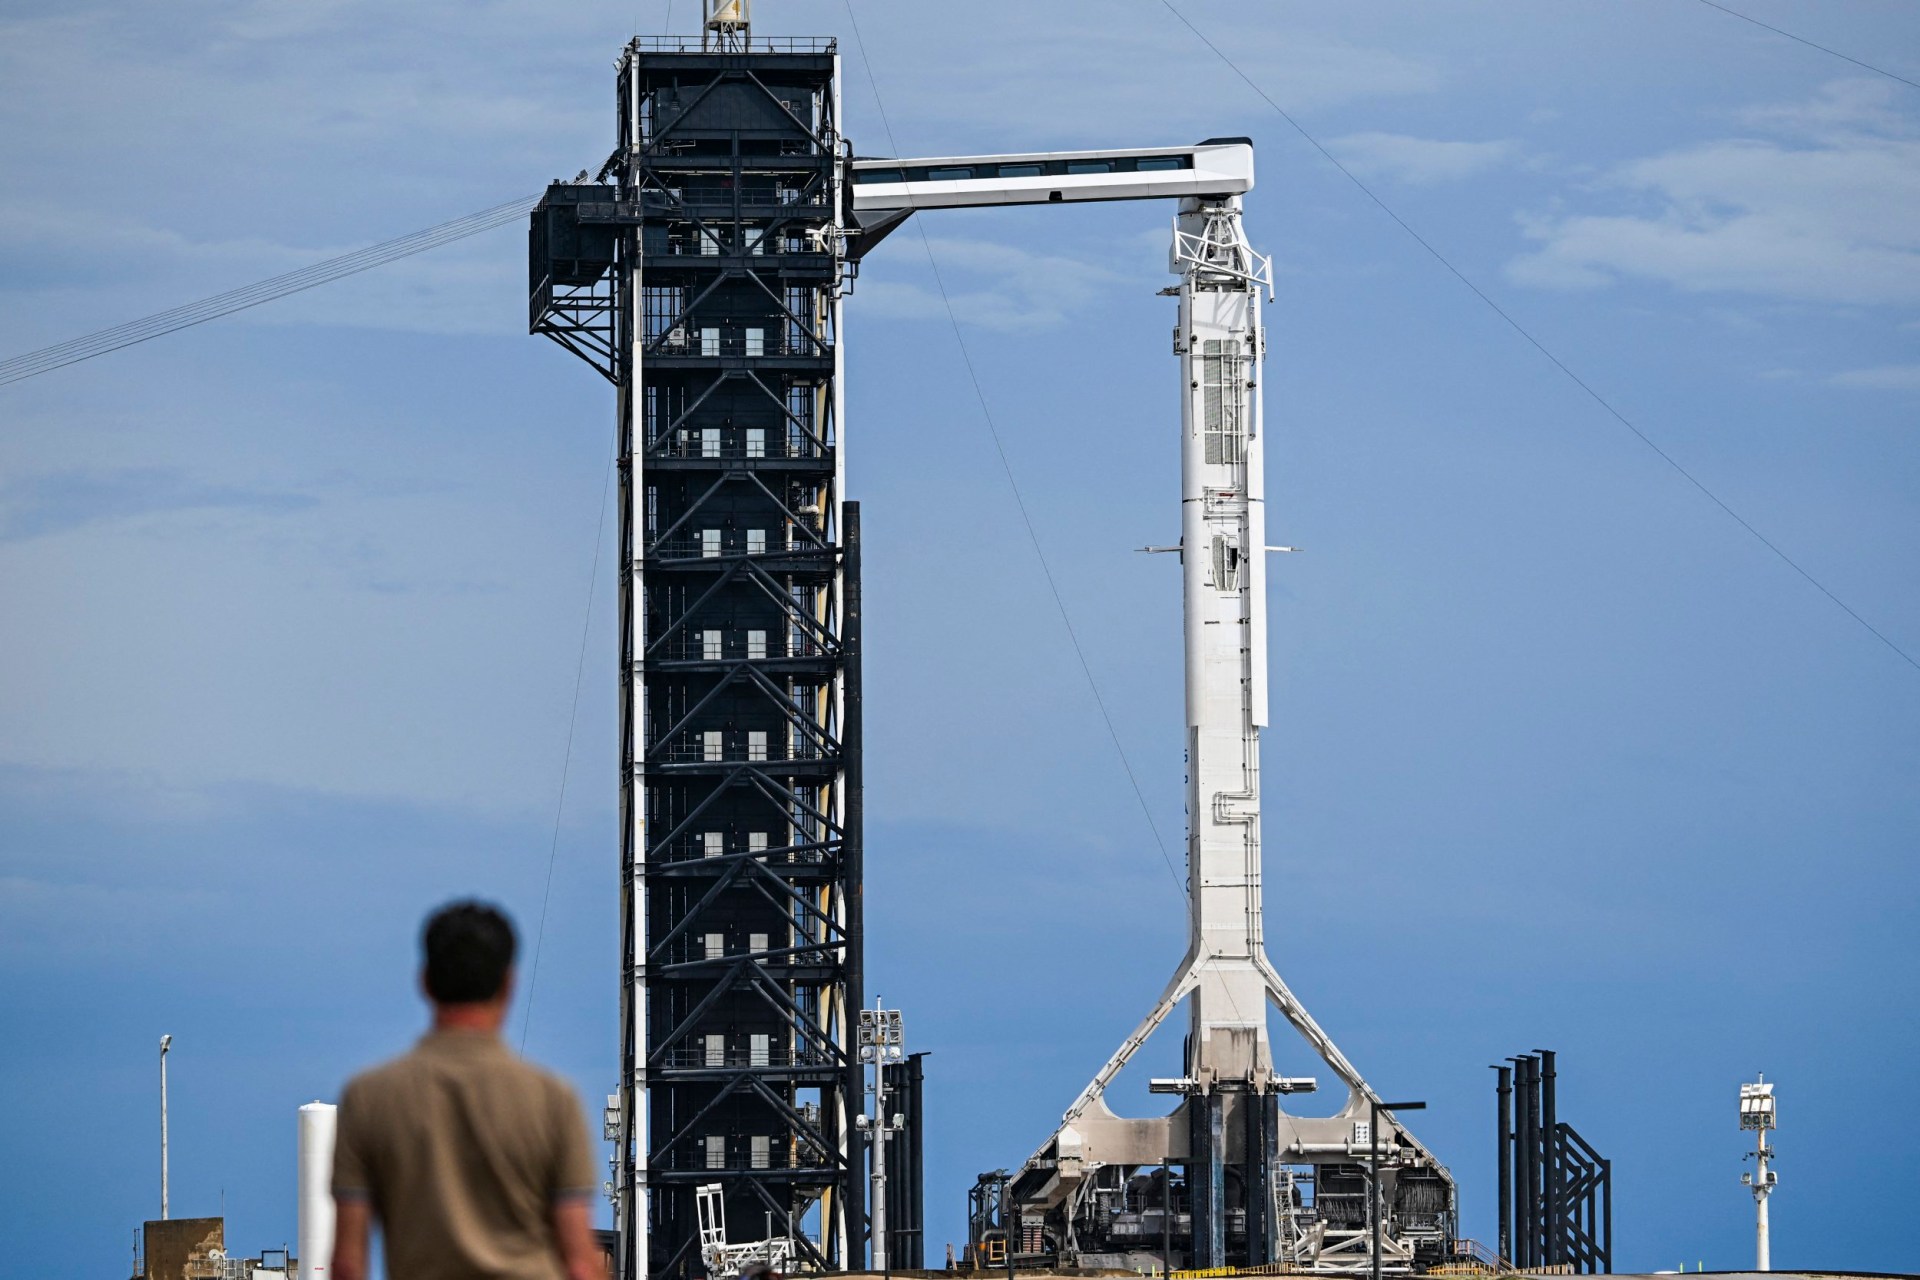 spacex launches us-russian crew into space after safety concerns